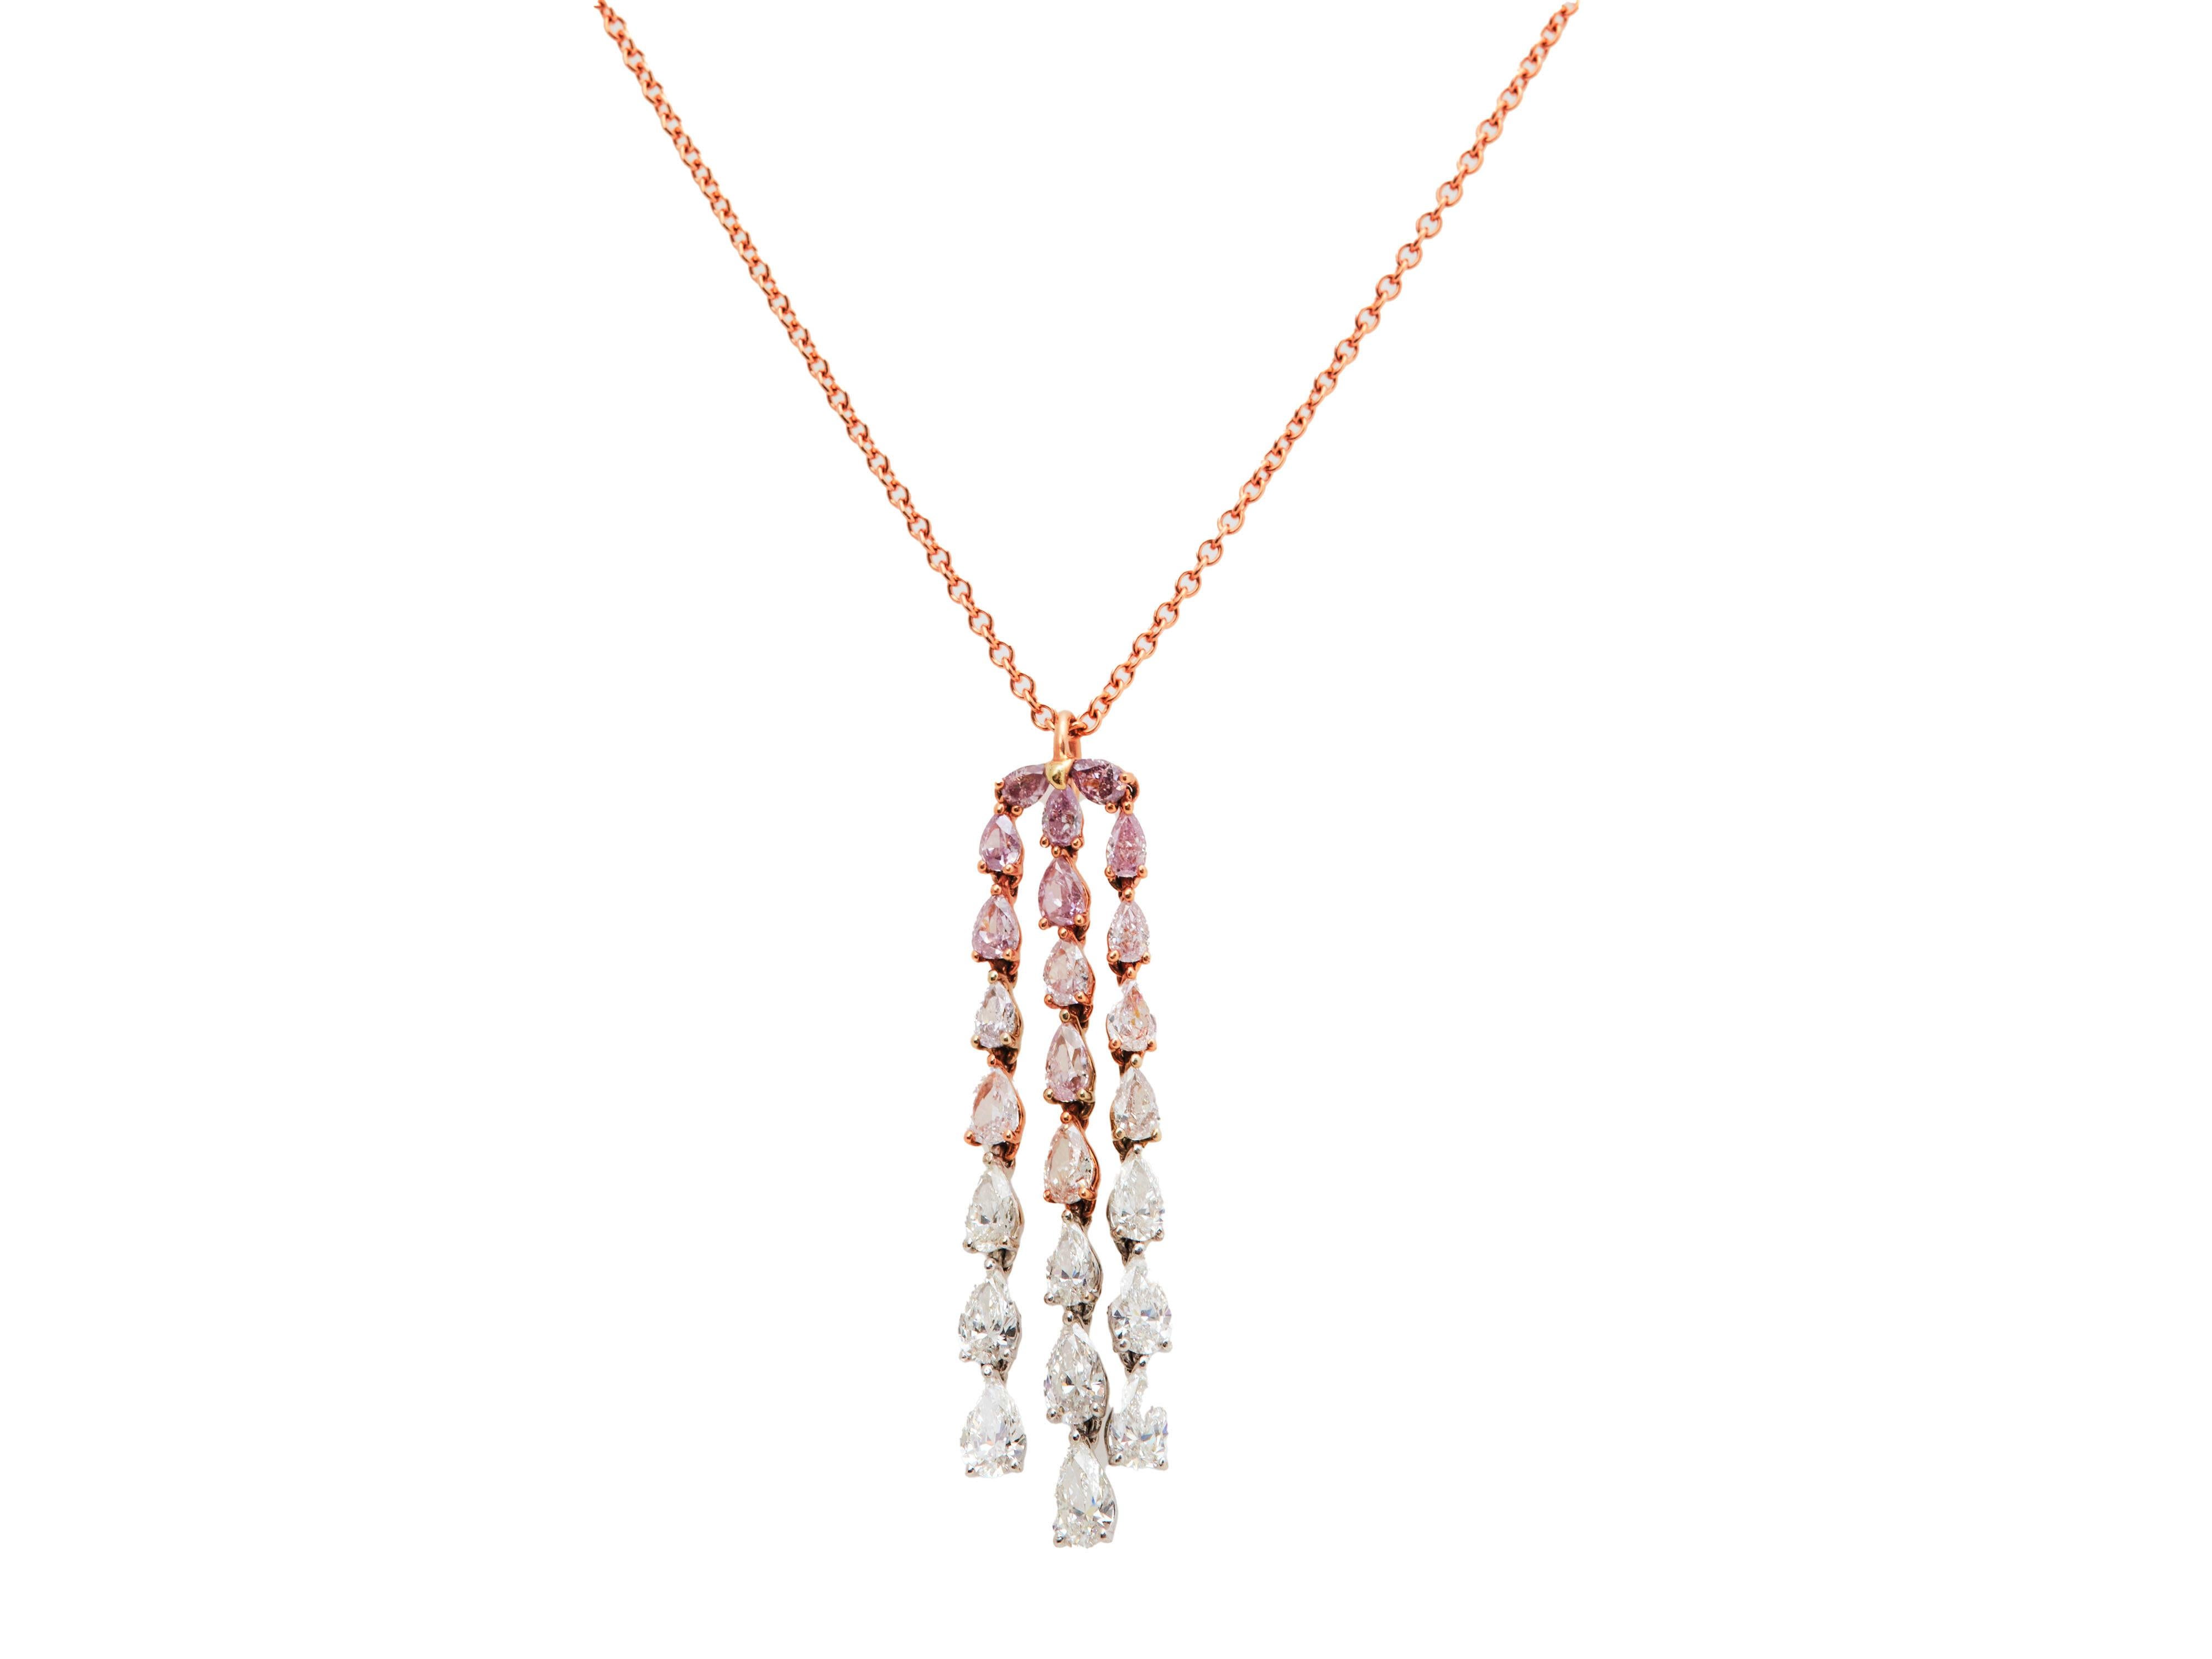 A gorgeous and unique necklace with beautiful movement. An impressive tassel made up of 34 pear-shaped pink and white diamonds VS clarities, mounted in a polished 18K Rose and white gold. hanging from a polished 18K rose gold chain.

This piece was